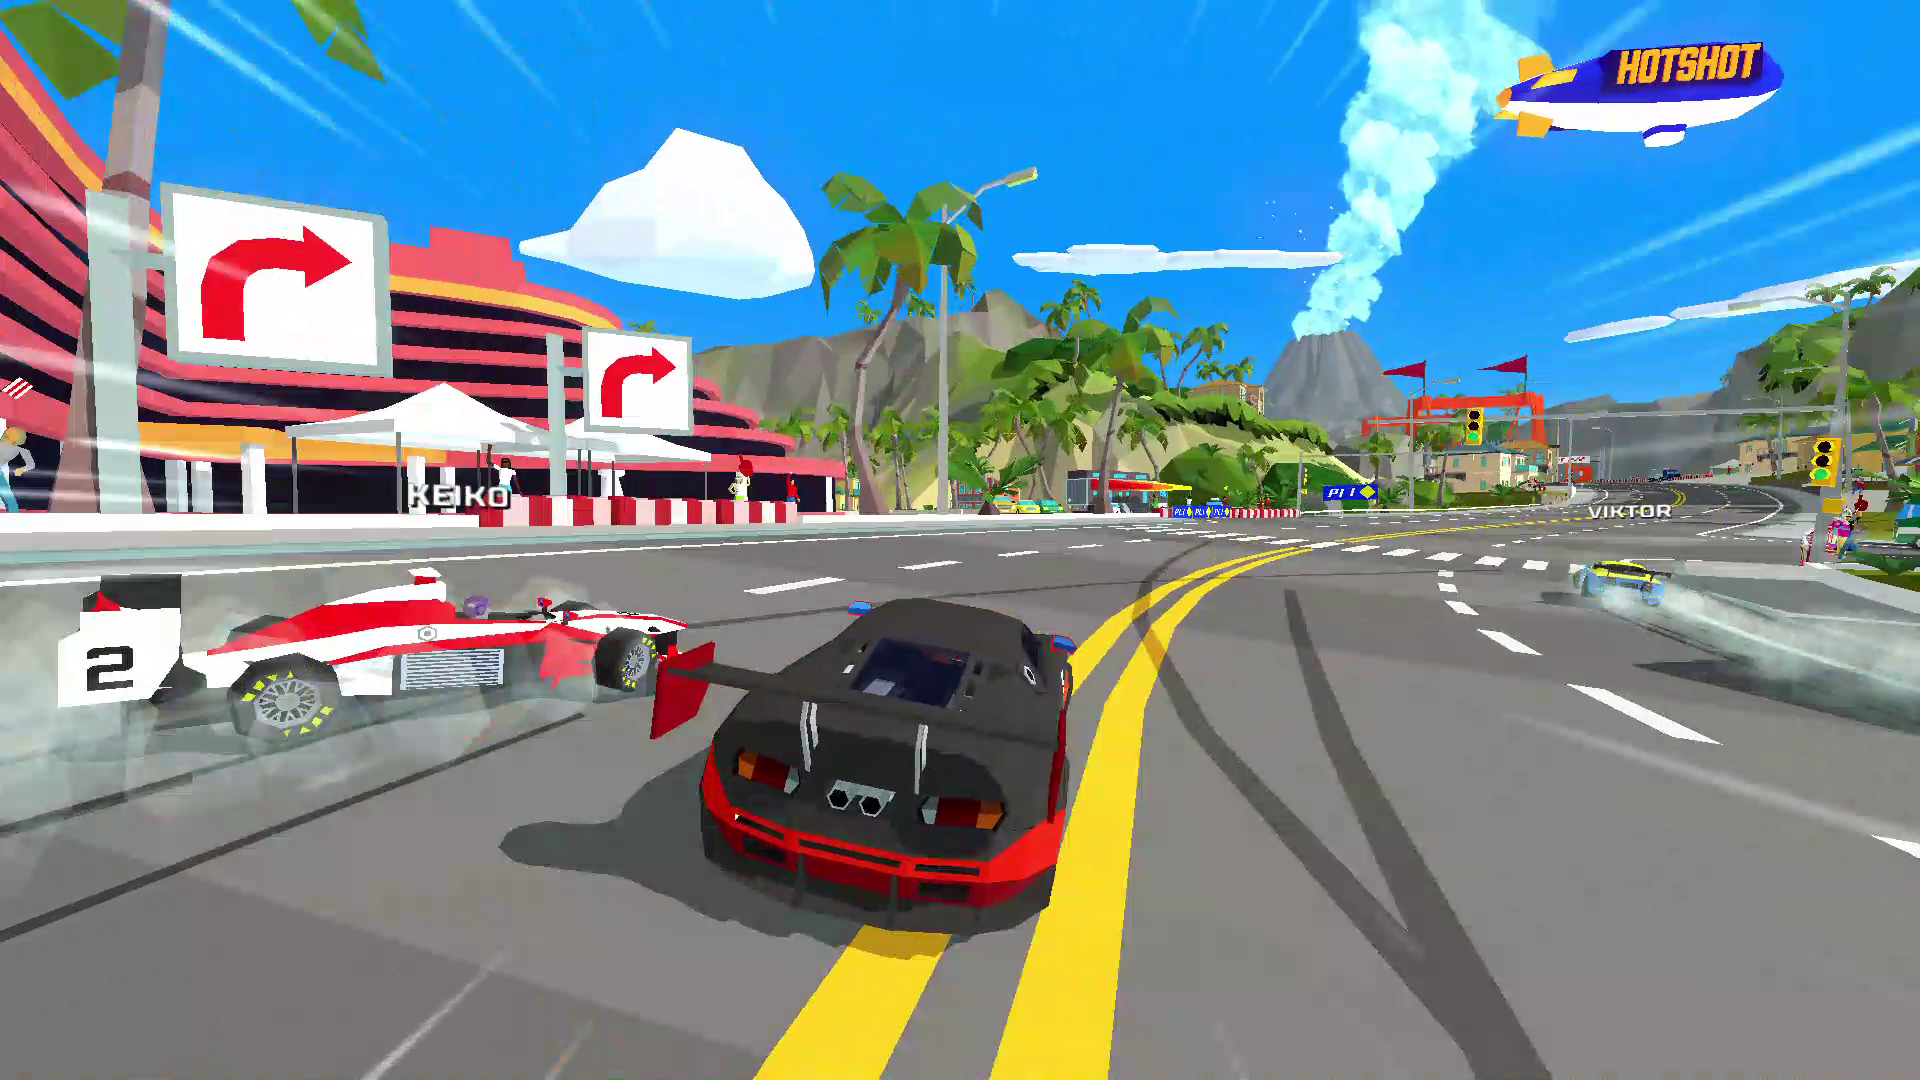 Hotshot Racing is a Beautiful Arcade Racer Coming to PS4 This Spring